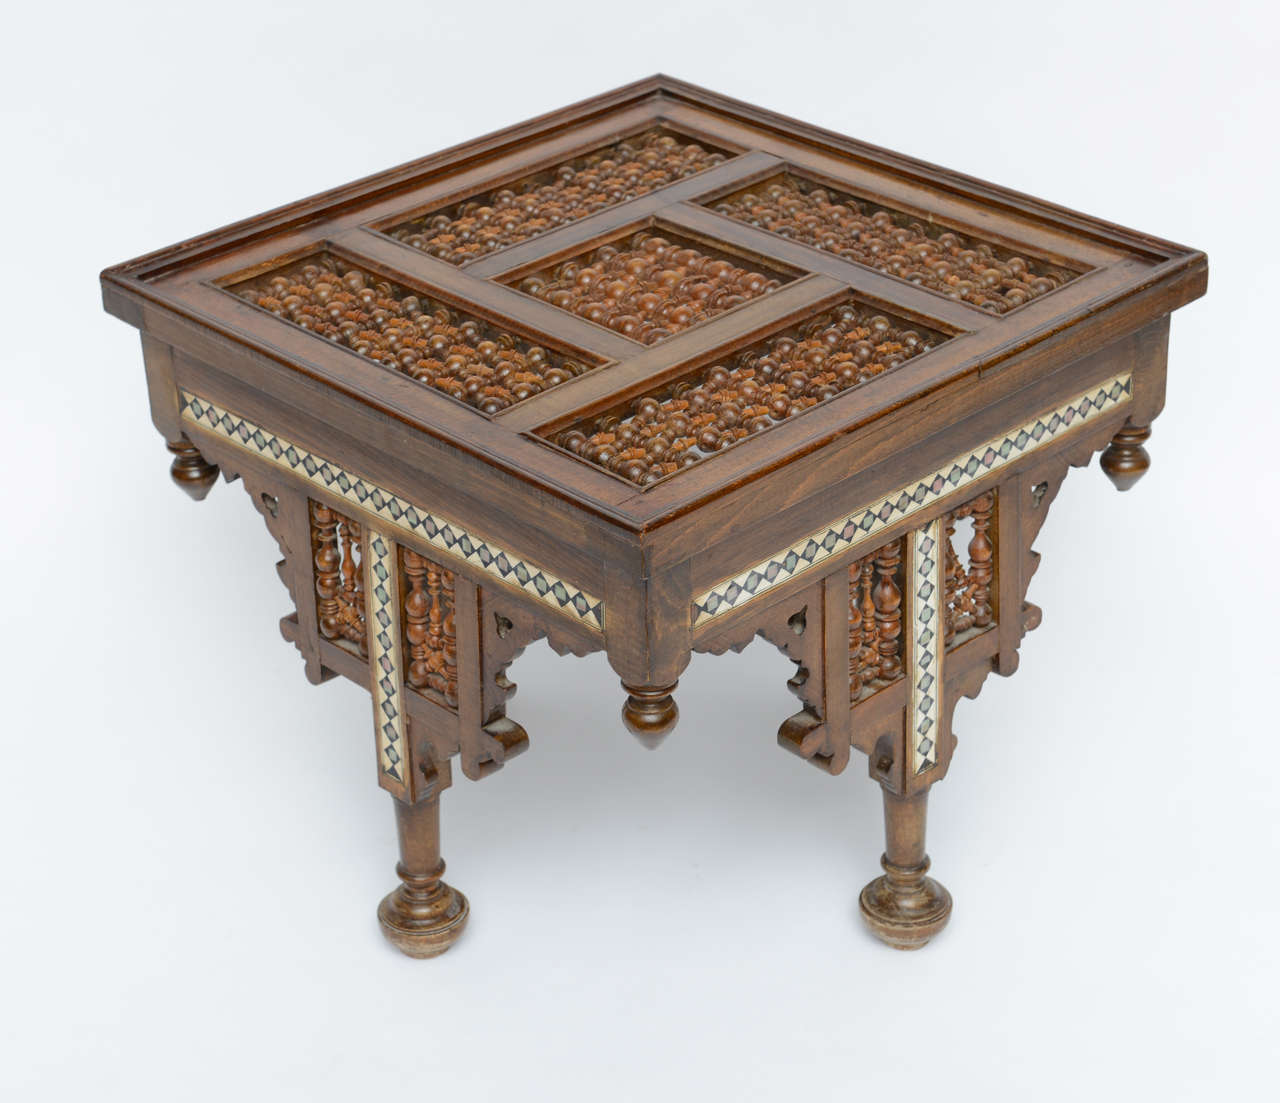 Wood Moroccan Table Inlaid with Bone & Ivory, 19th Century